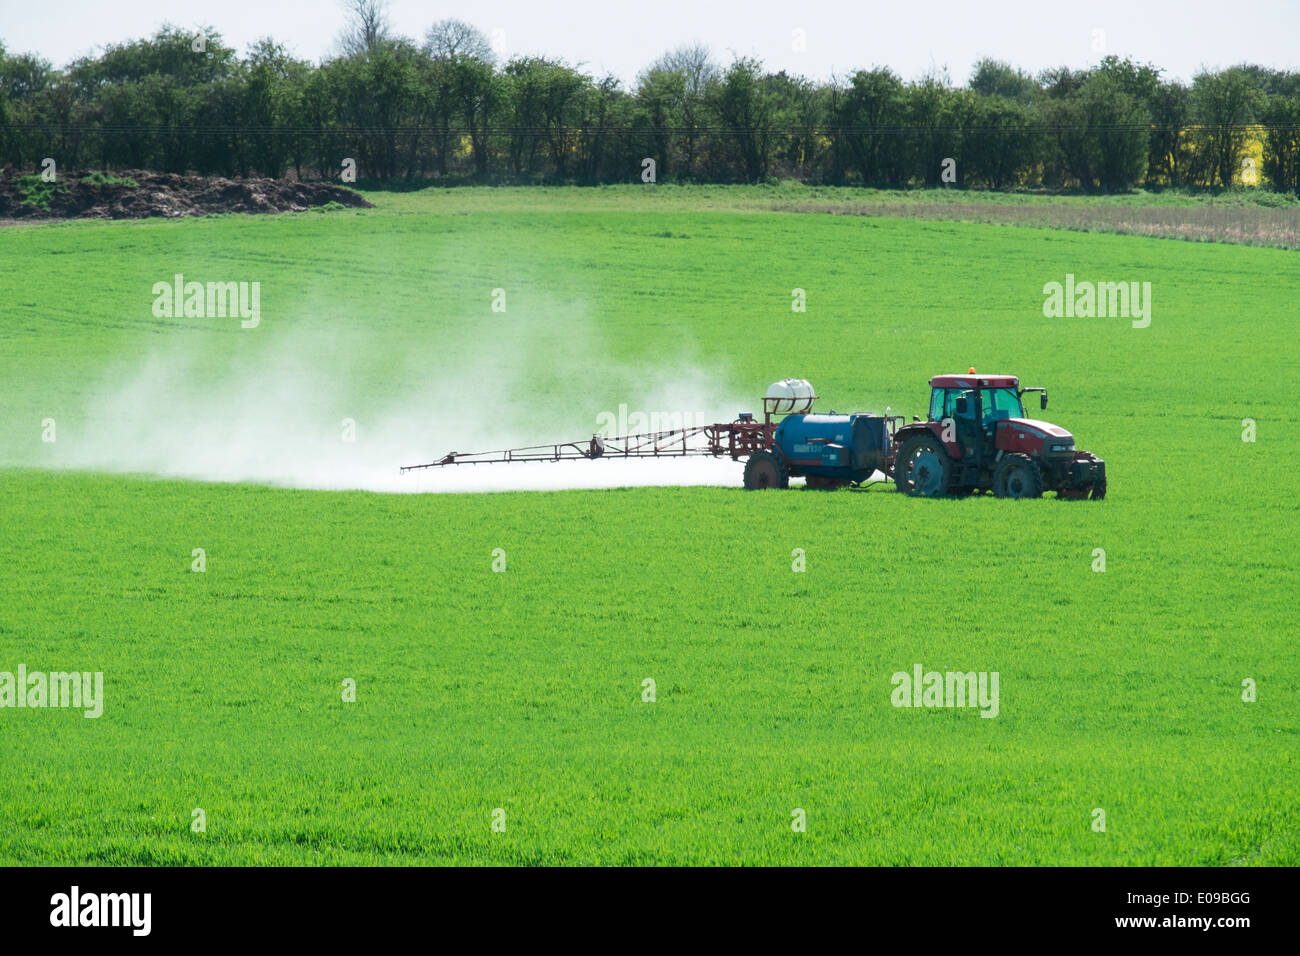 Tractor and spraying unit on cereal crop, showing significant spray drift. Stock Photo